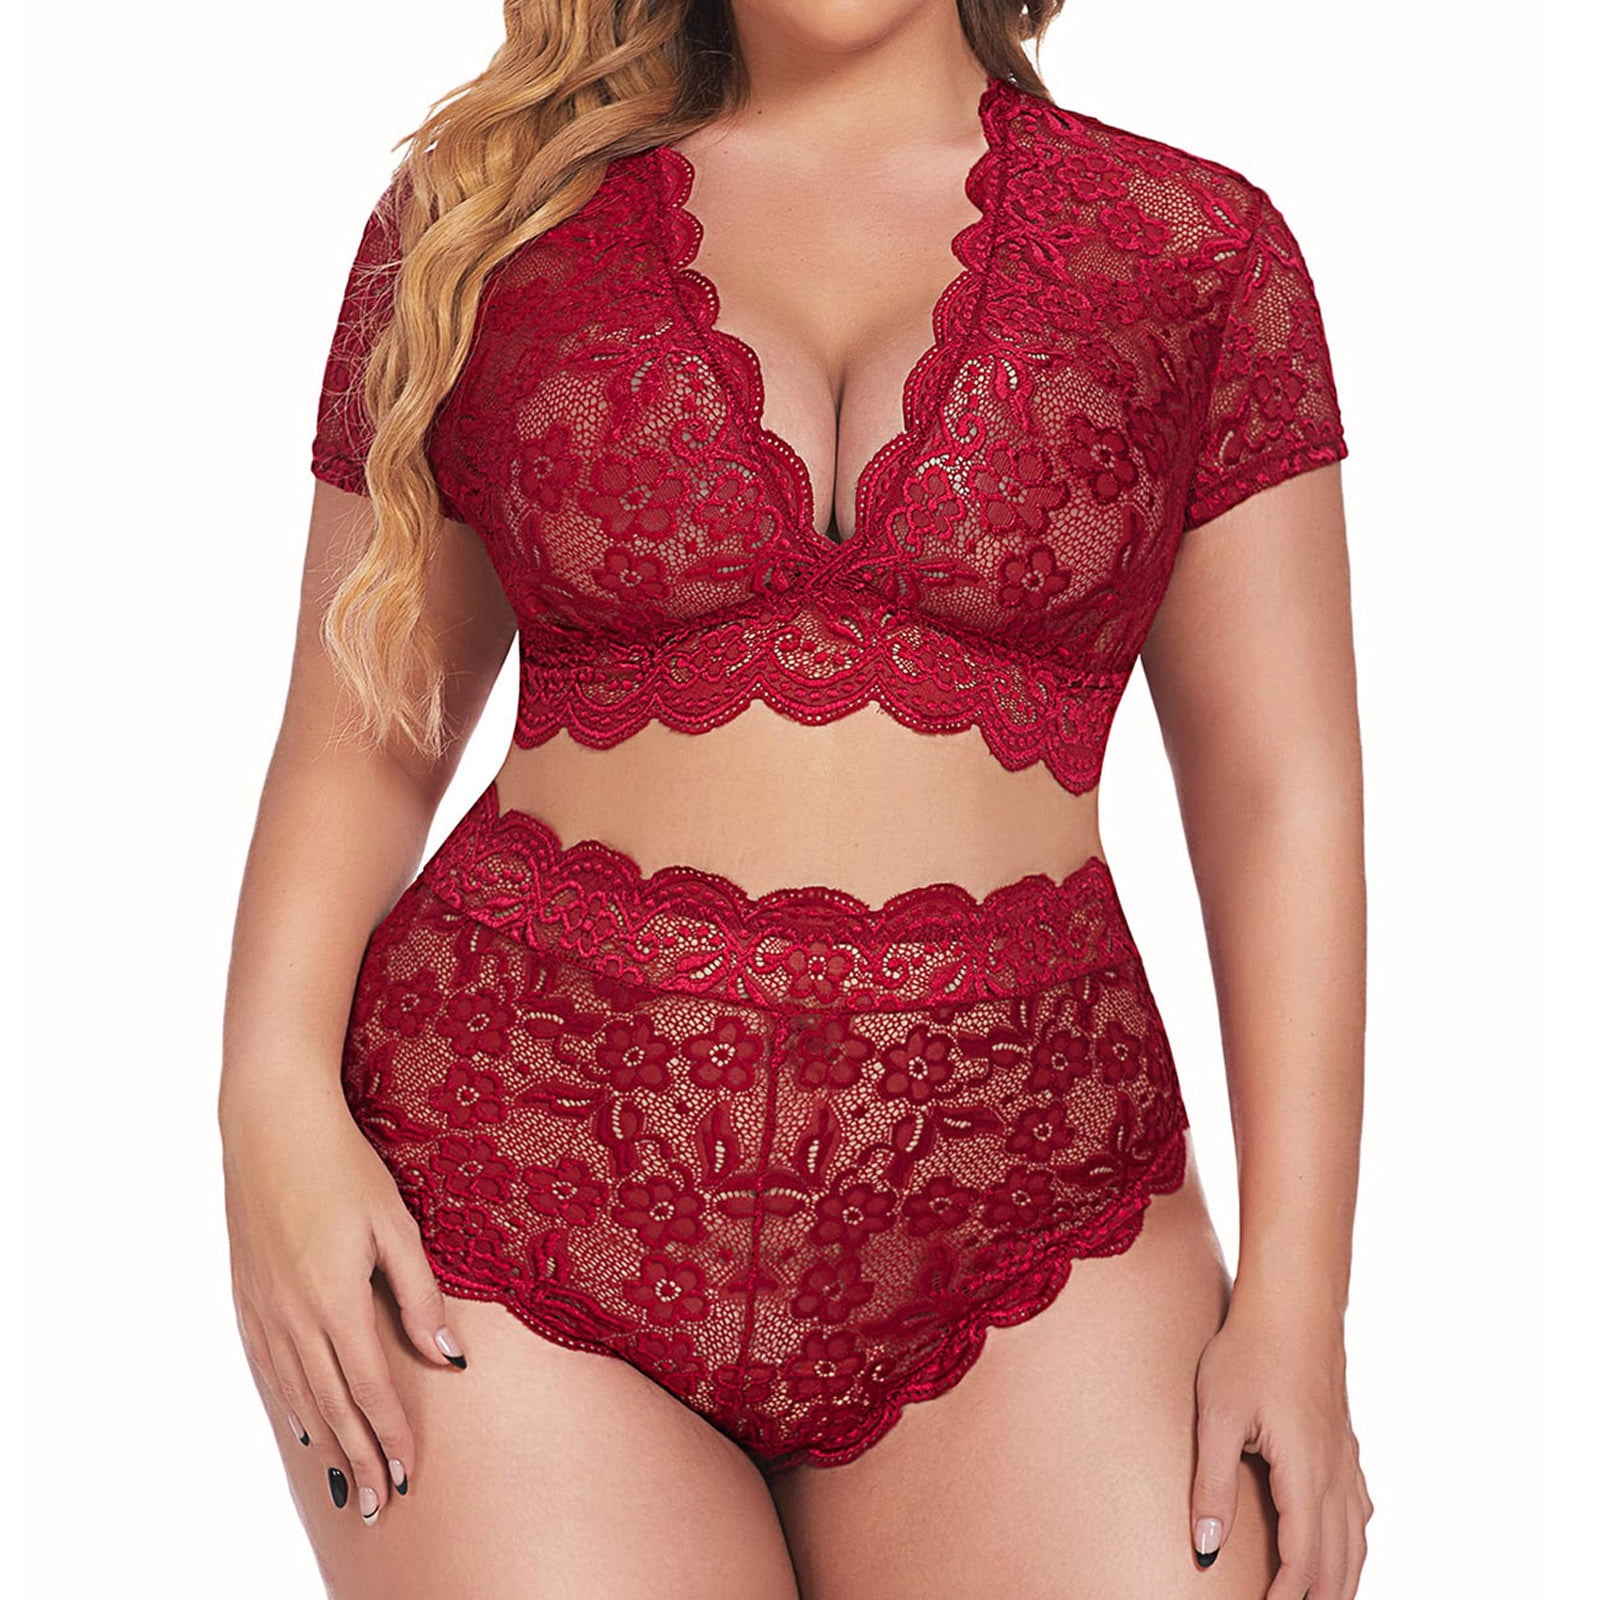 Gibobby Sexy Lingerie For Women's Sexy Lingerie Floral Lace Sheer